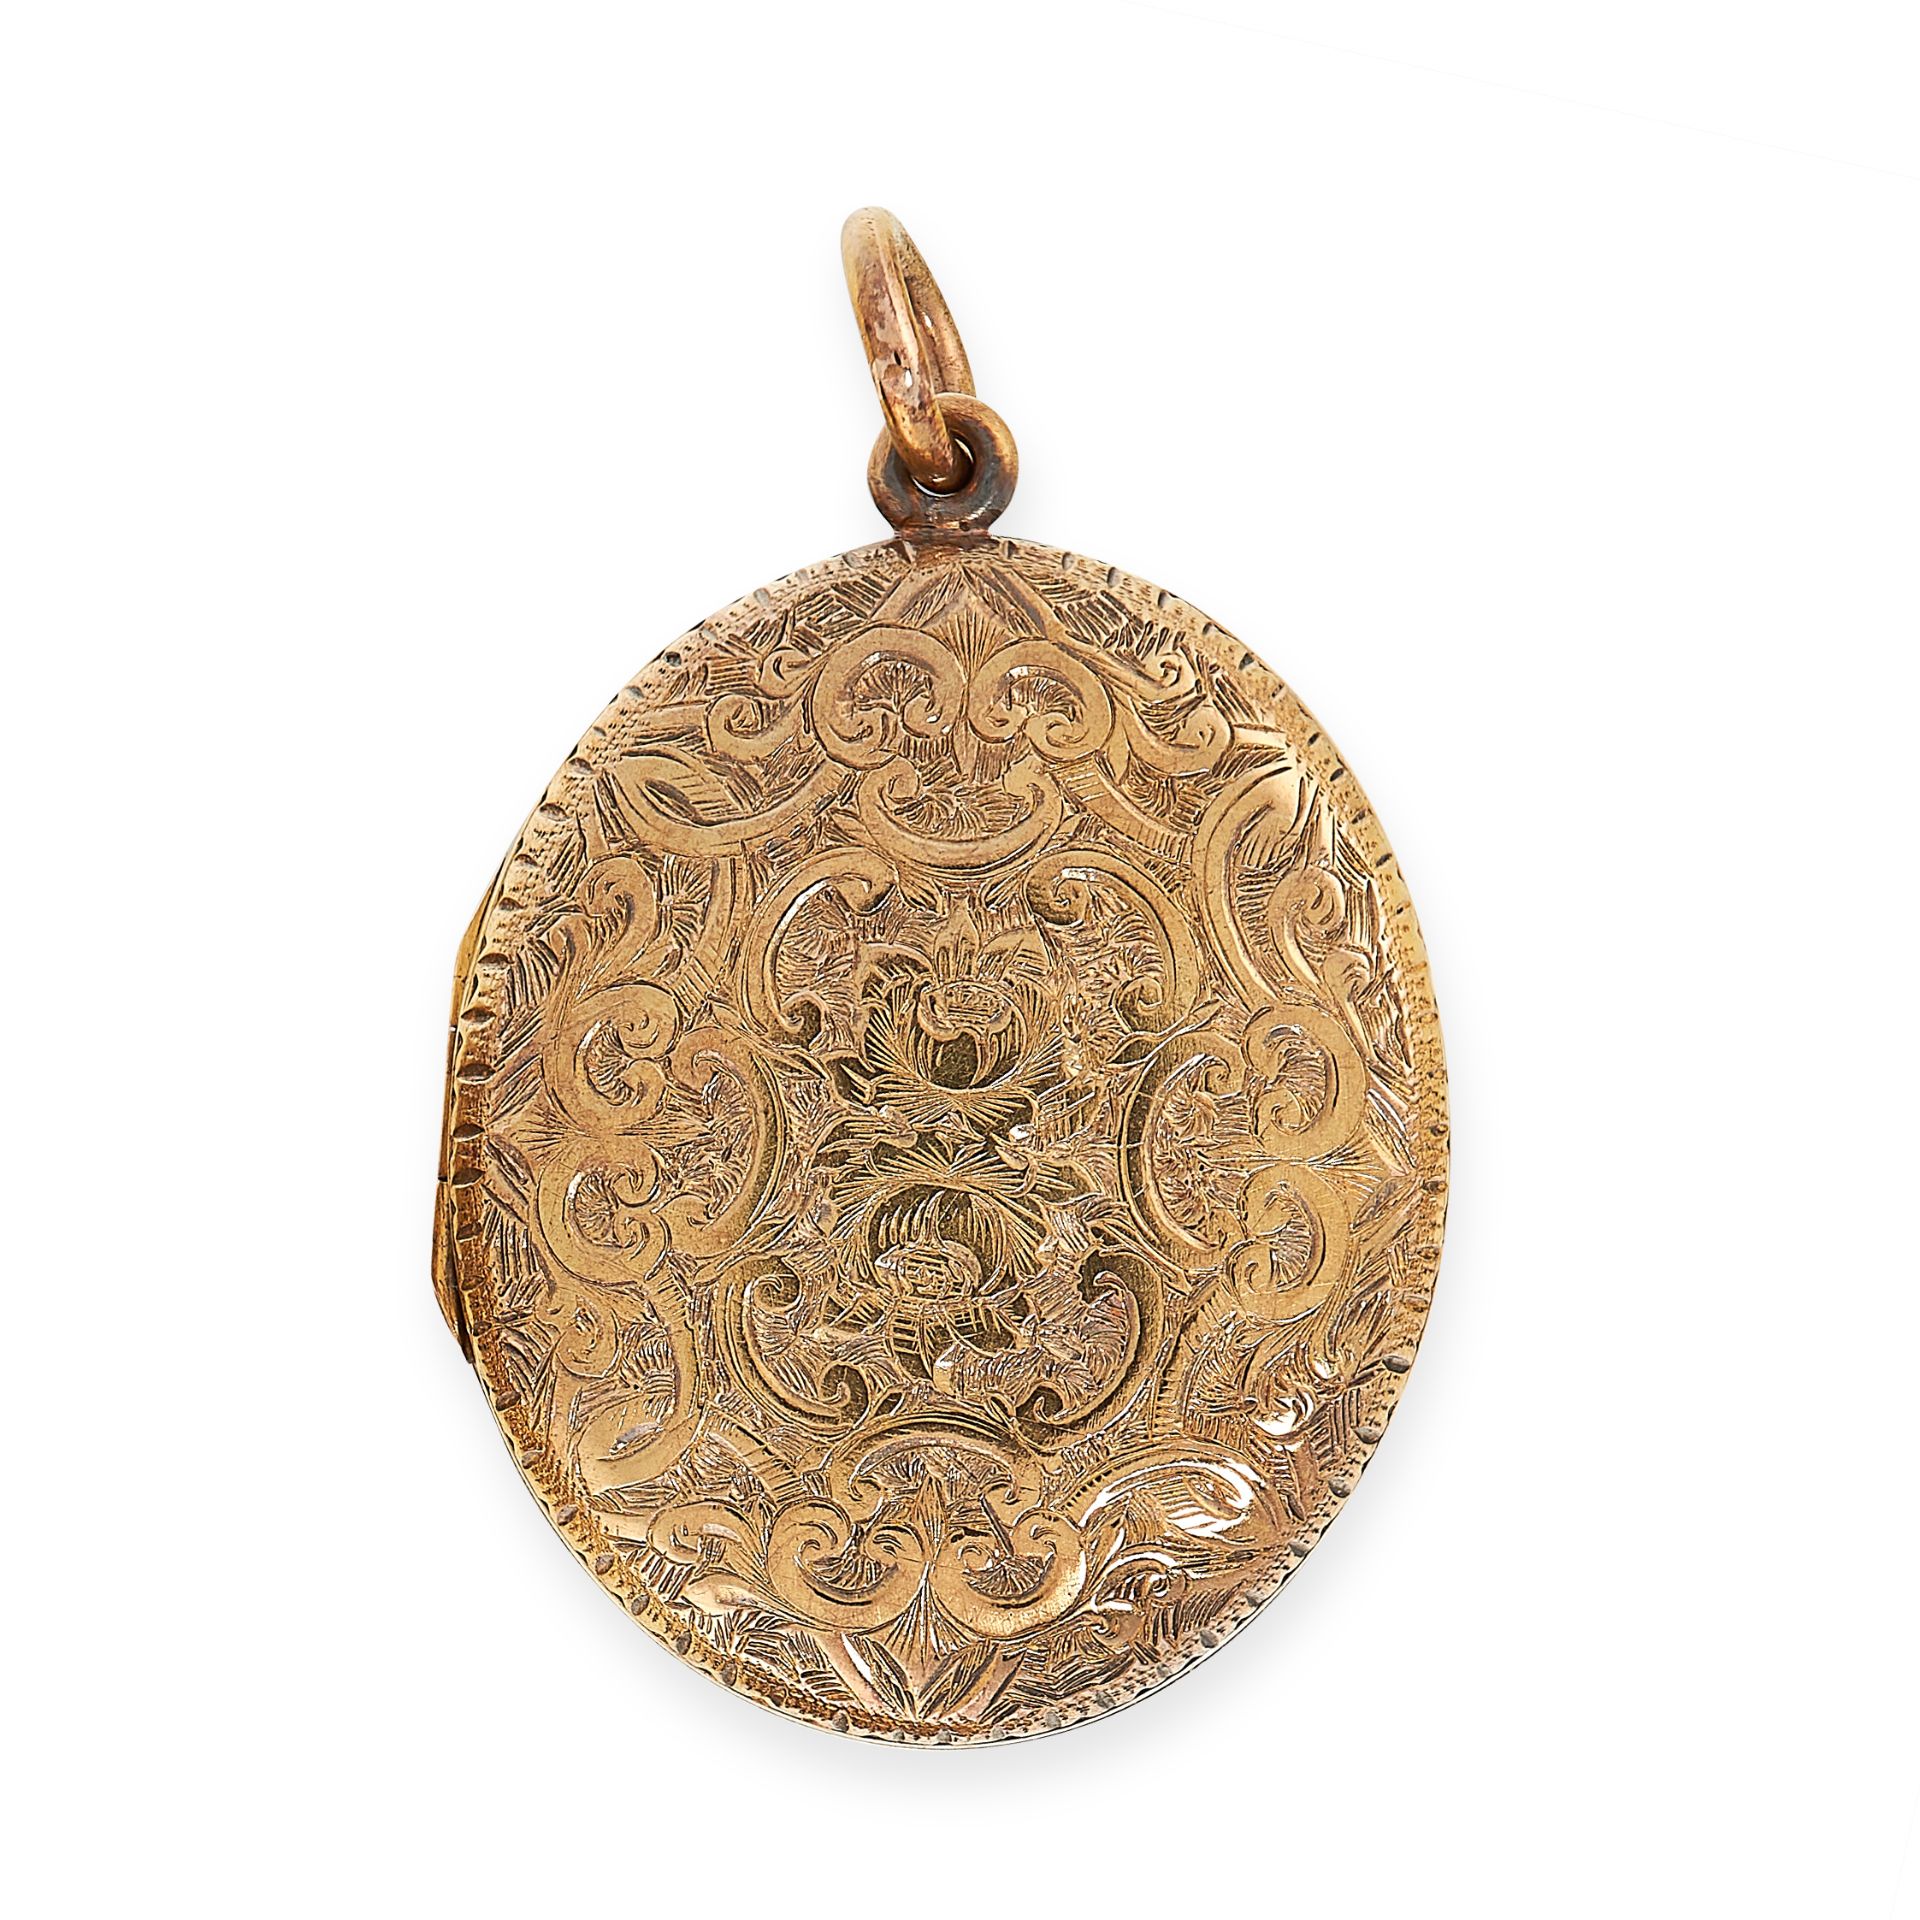 ANTIQUE MOURNING LOCKET PENDANT, 19TH CENTURY in yellow gold, the oval hinged body with engraved